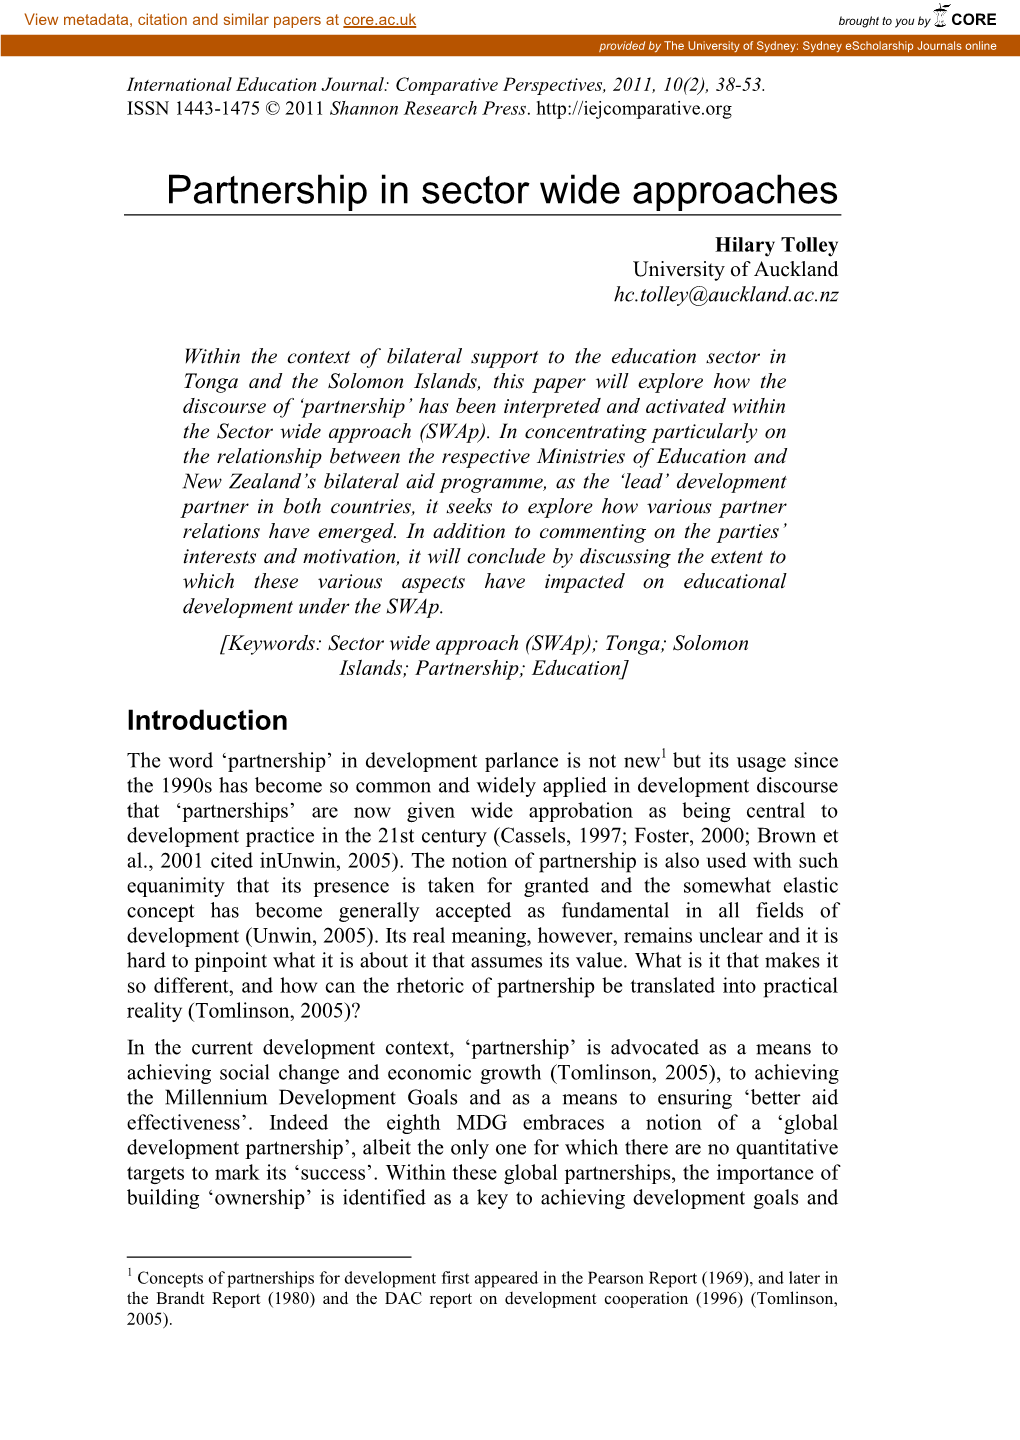 International Education Journal: Comparative Perspectives, 2011, 10(2), 38-53